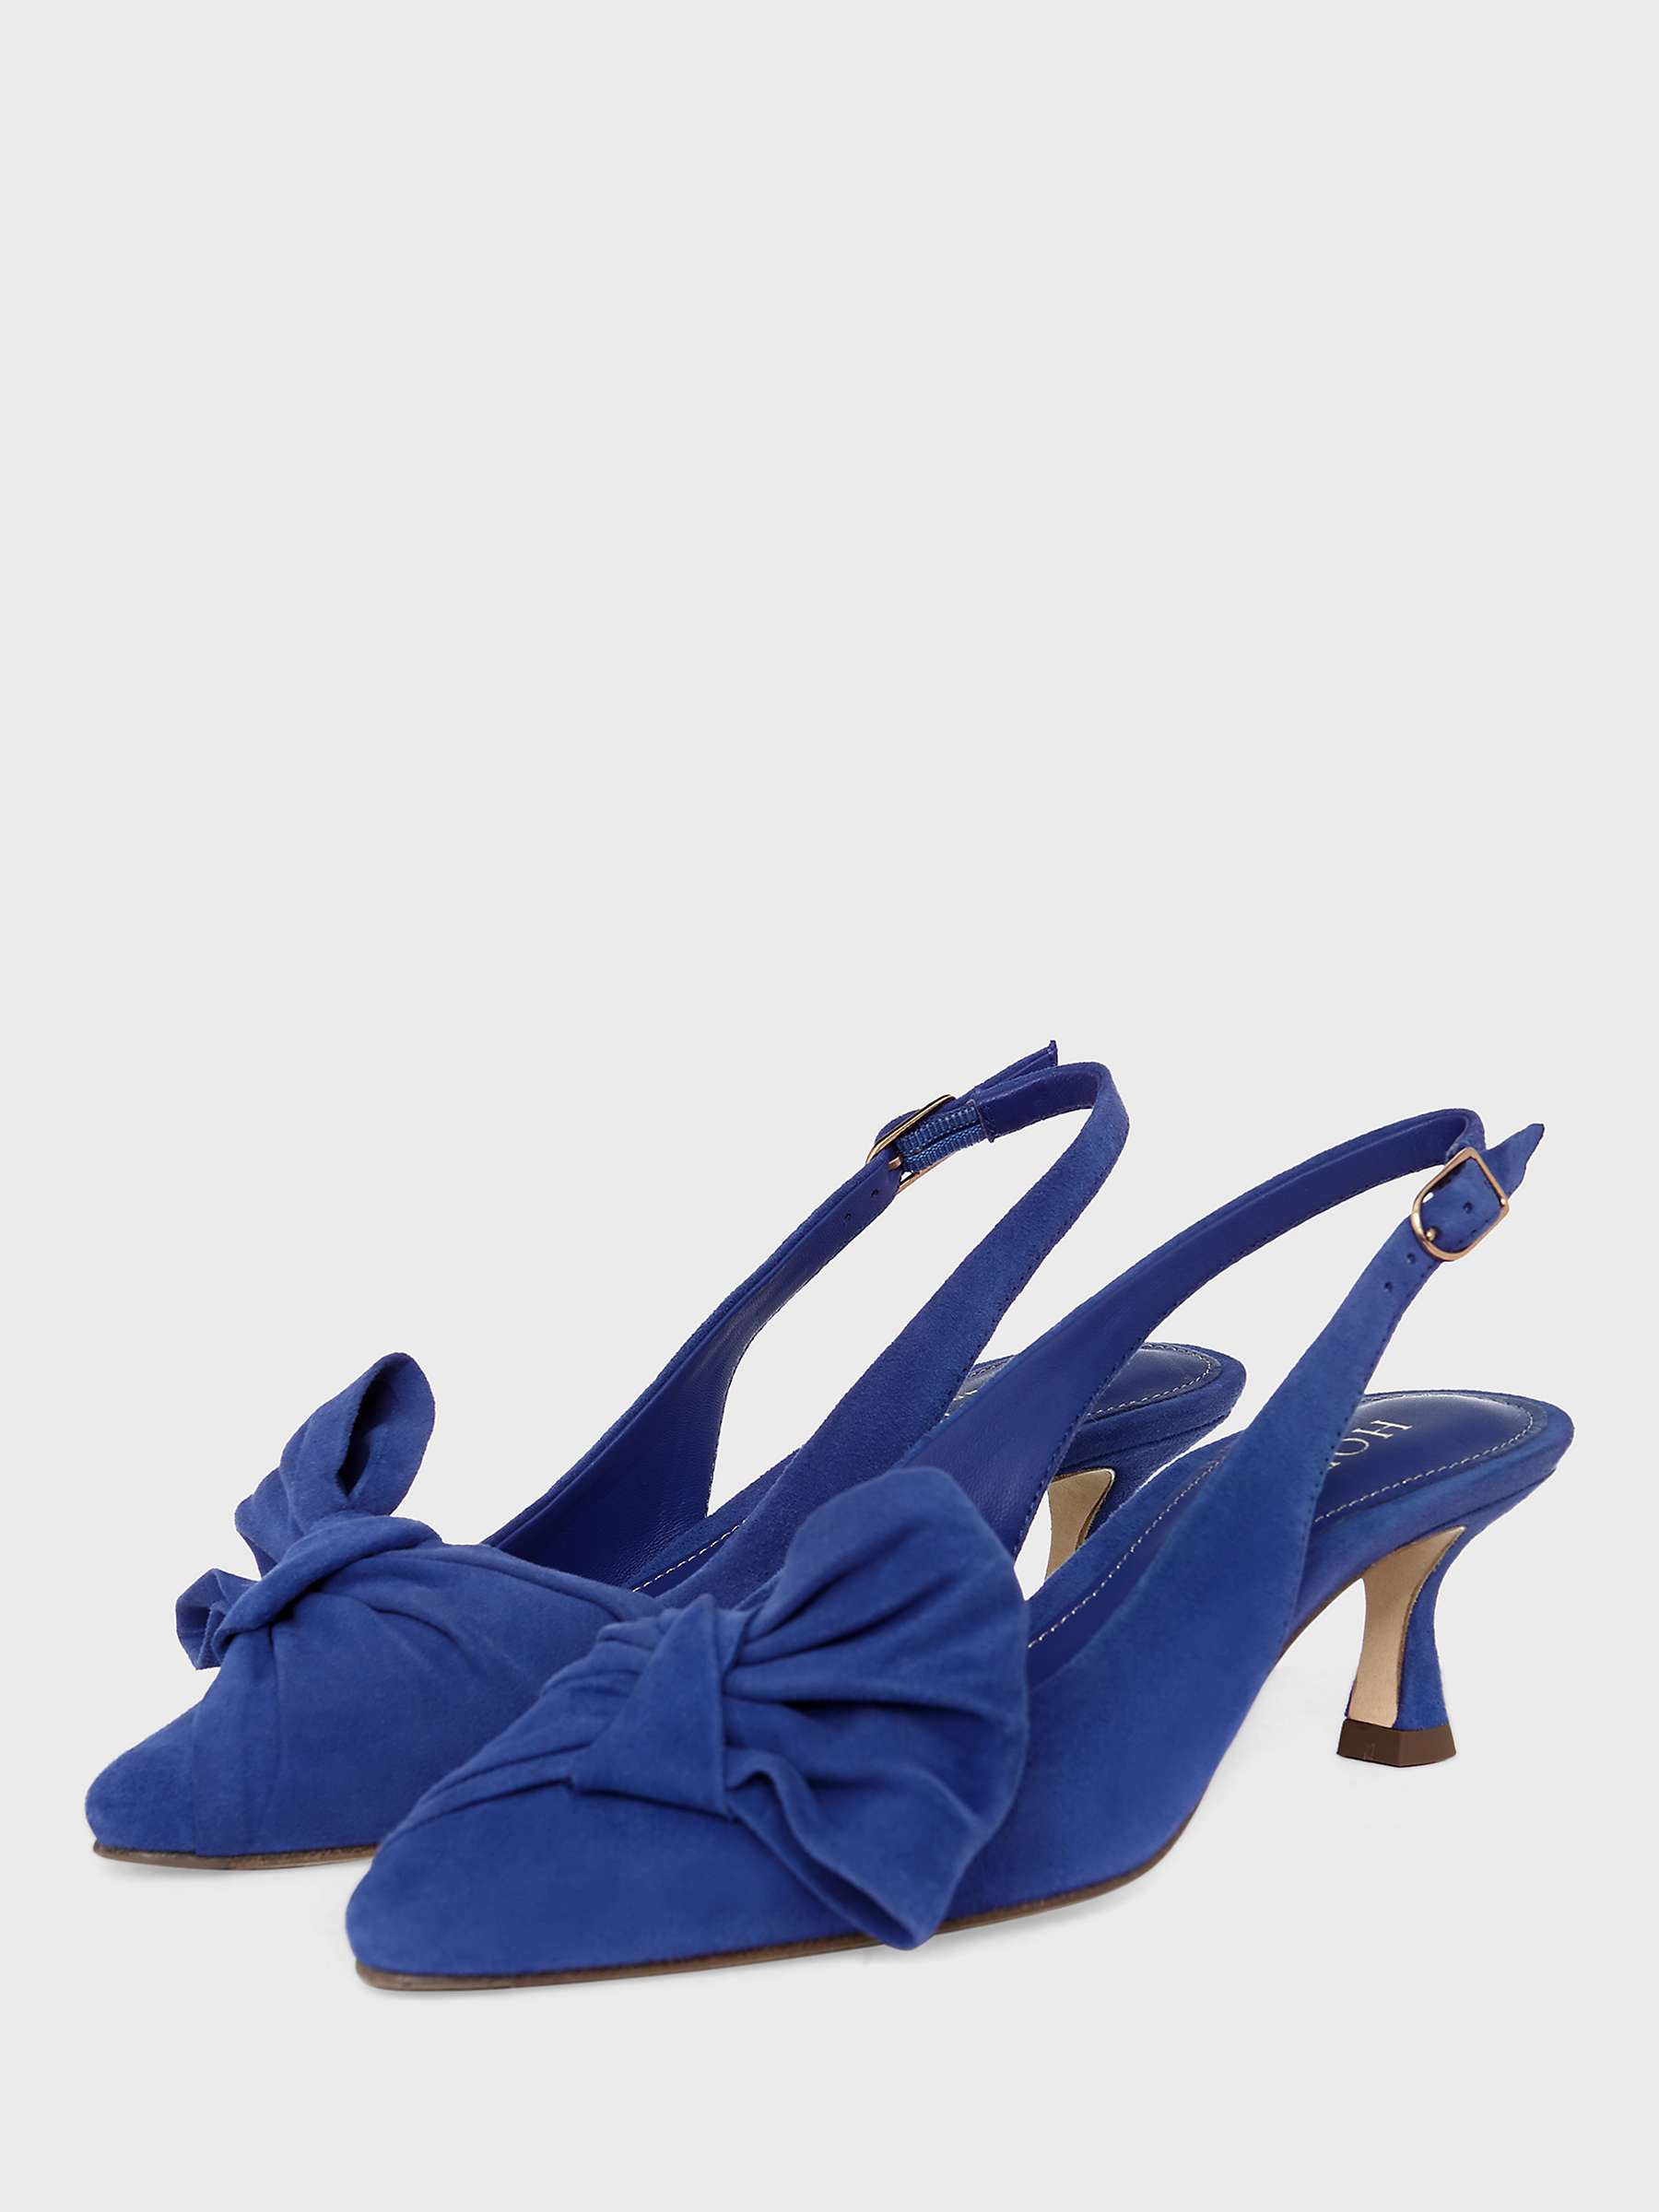 Buy Hobbs Francis Slingback Suede Court Shoes Online at johnlewis.com